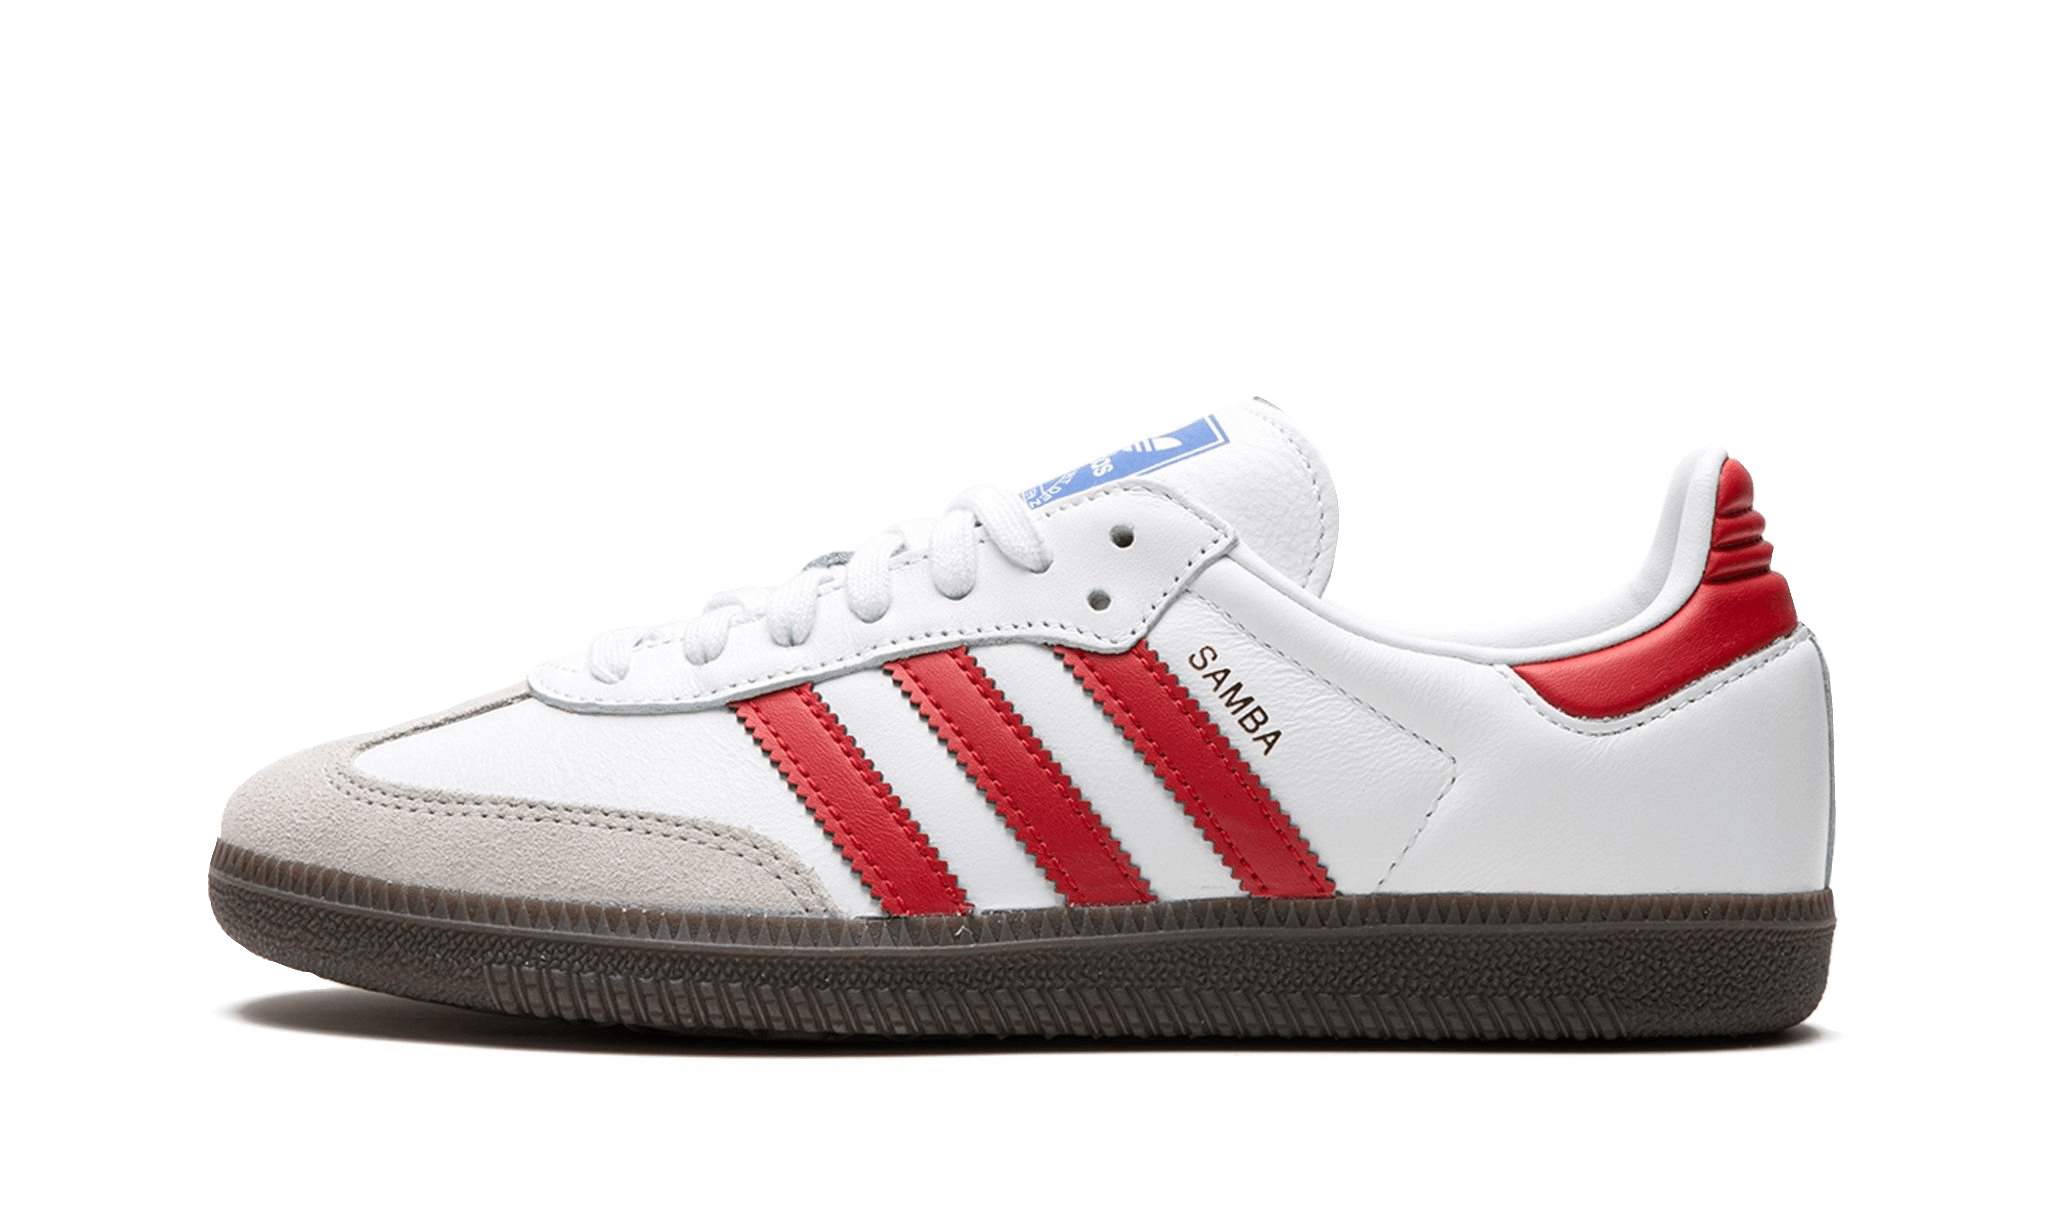 Adidas Samba OG White Red - Sneaker Request - Sneakers - Adidas